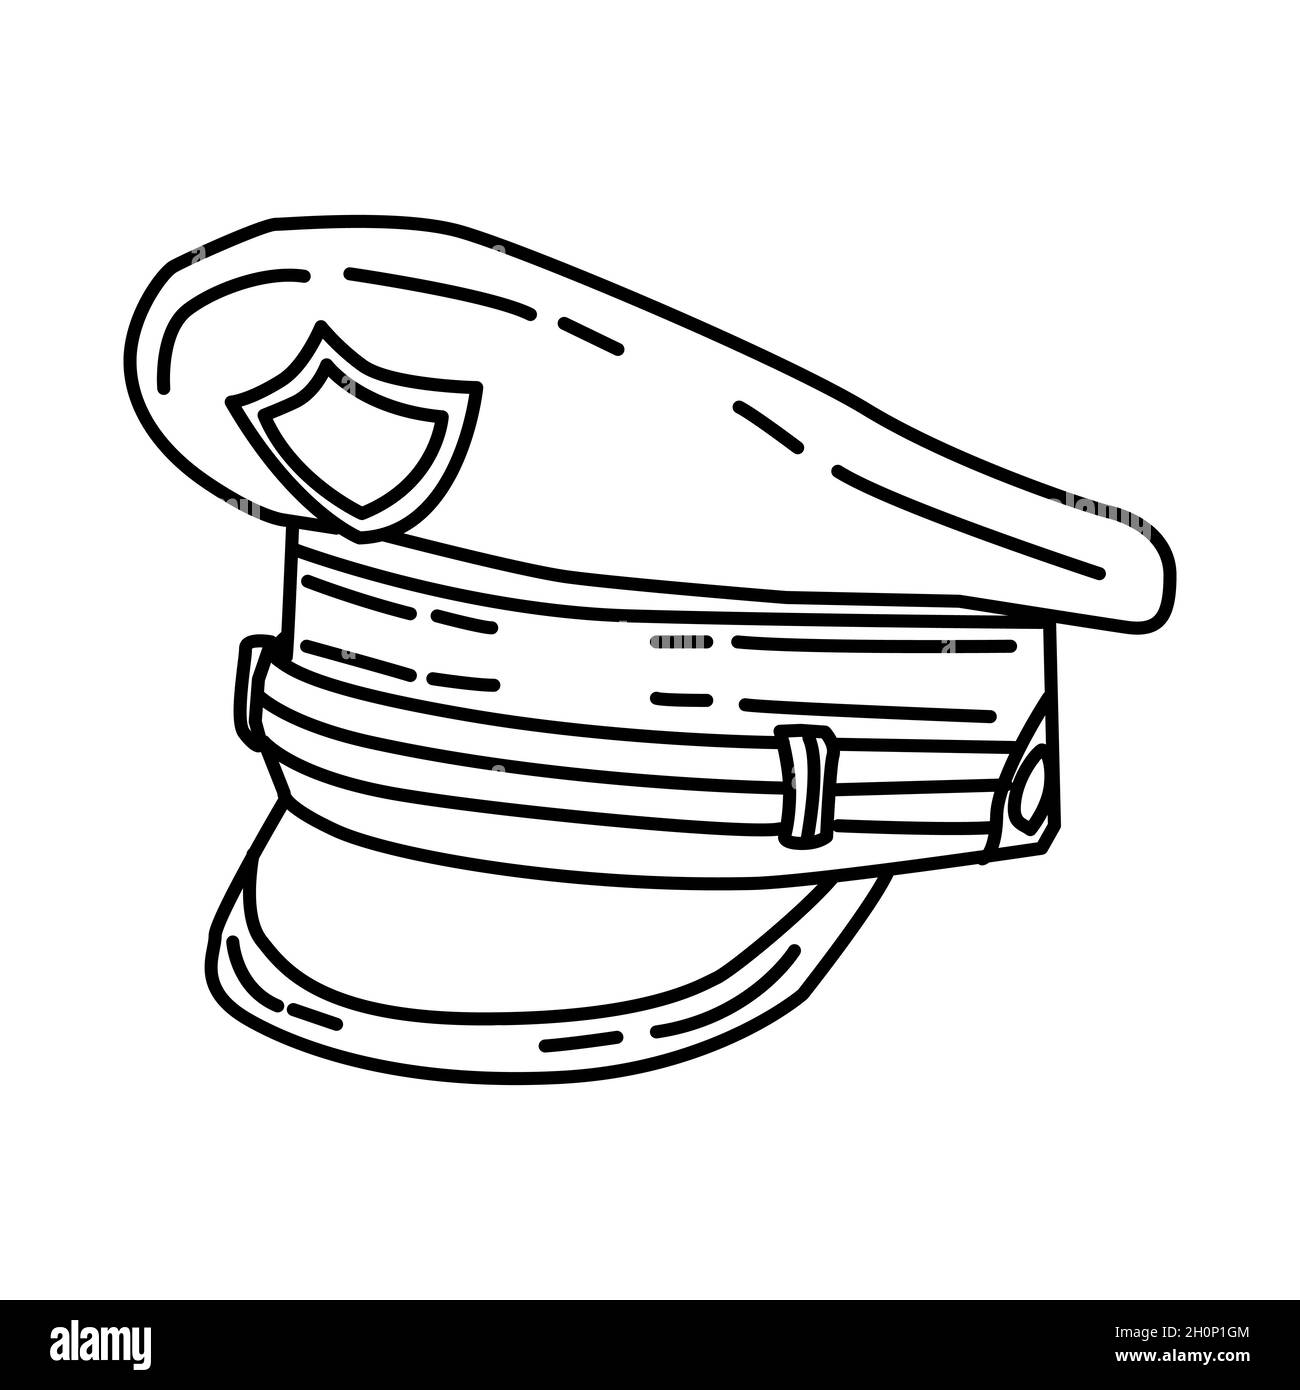 Police Officer Cap Part of Police Equipment and Accessories Hand Drawn Icon Set Vector. Stock Vector